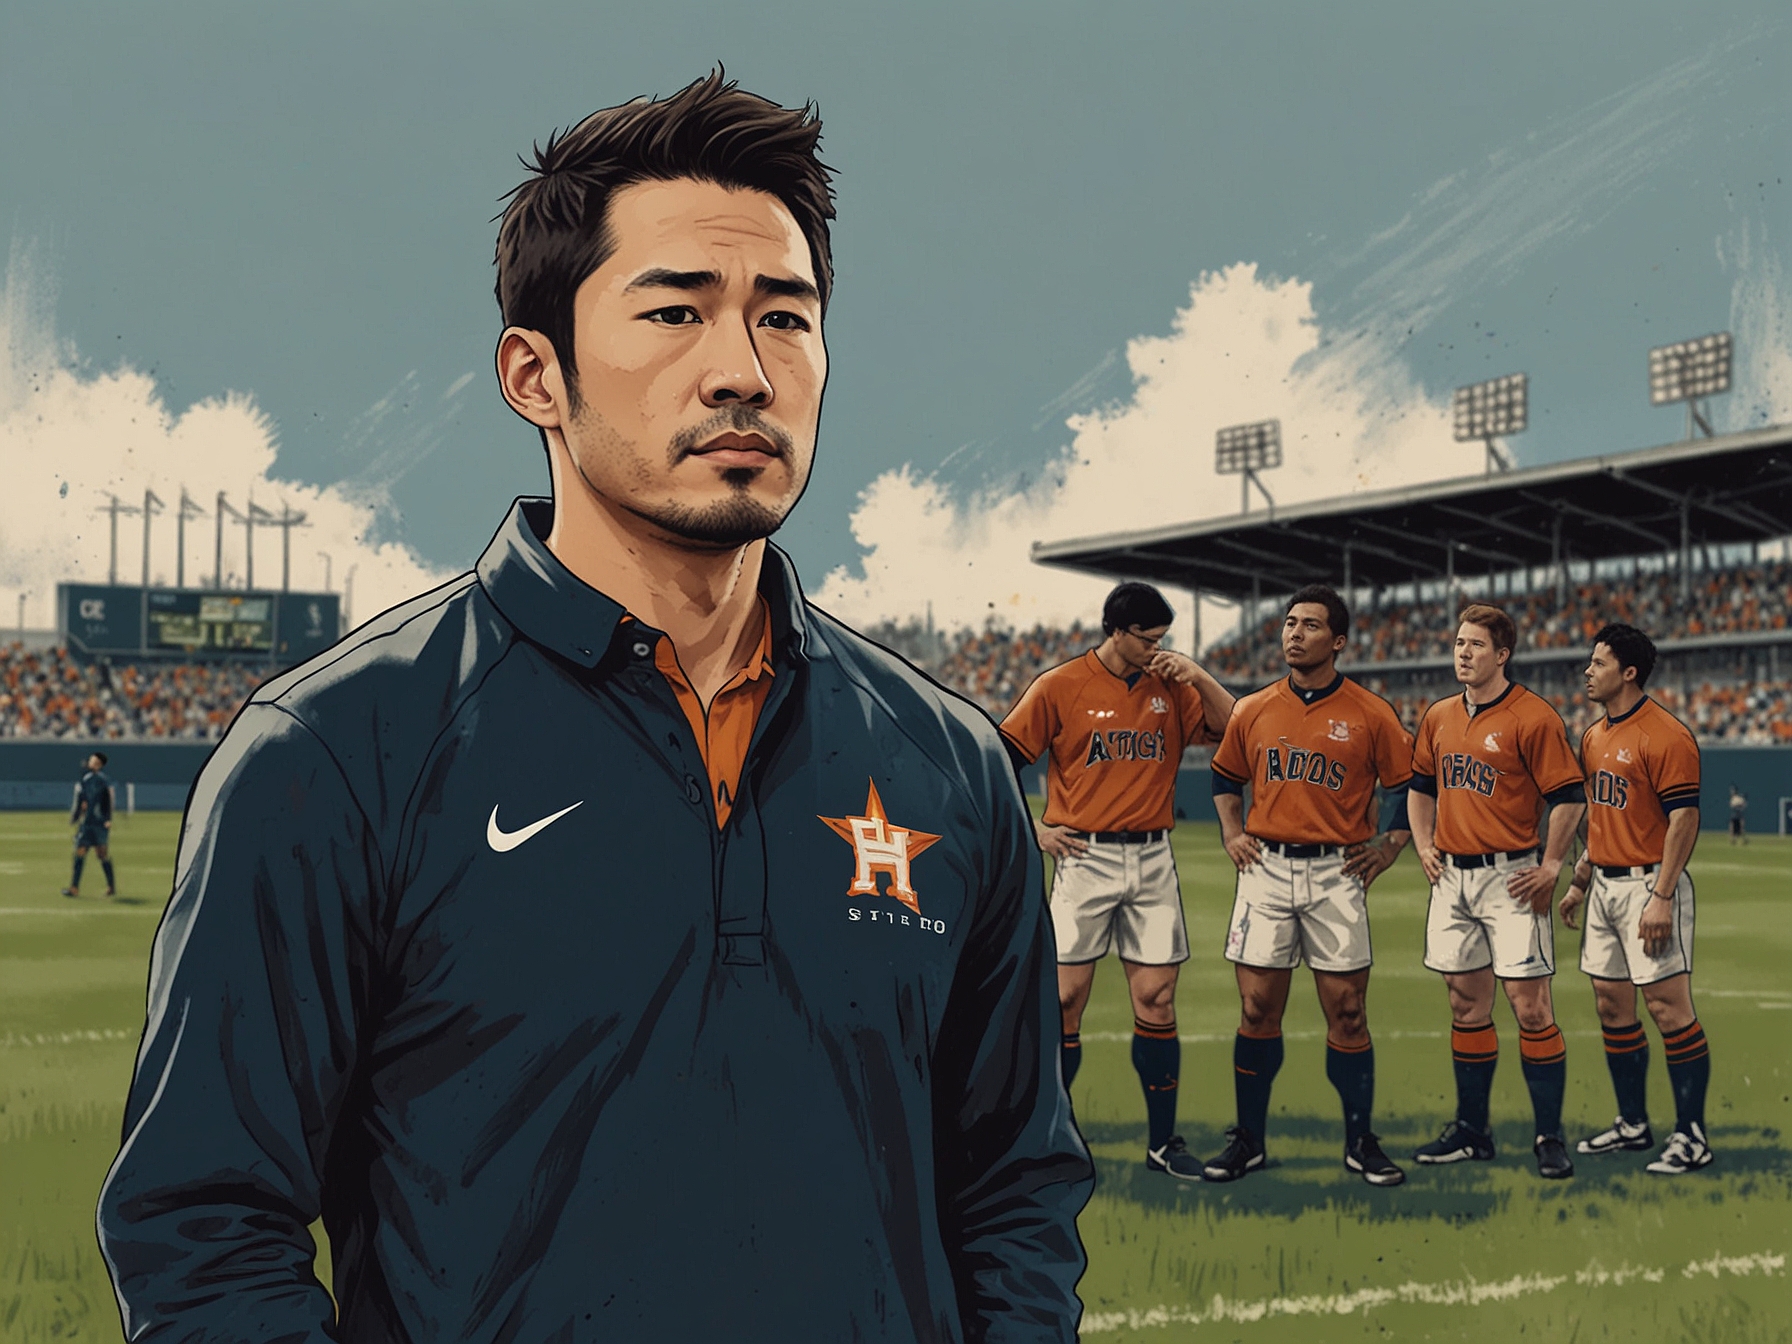 Hayato Kimijima stands on a rugby field with the Astros team behind him, illustrating his new role as their manager. The team looks determined, symbolizing their collective struggle and growth.